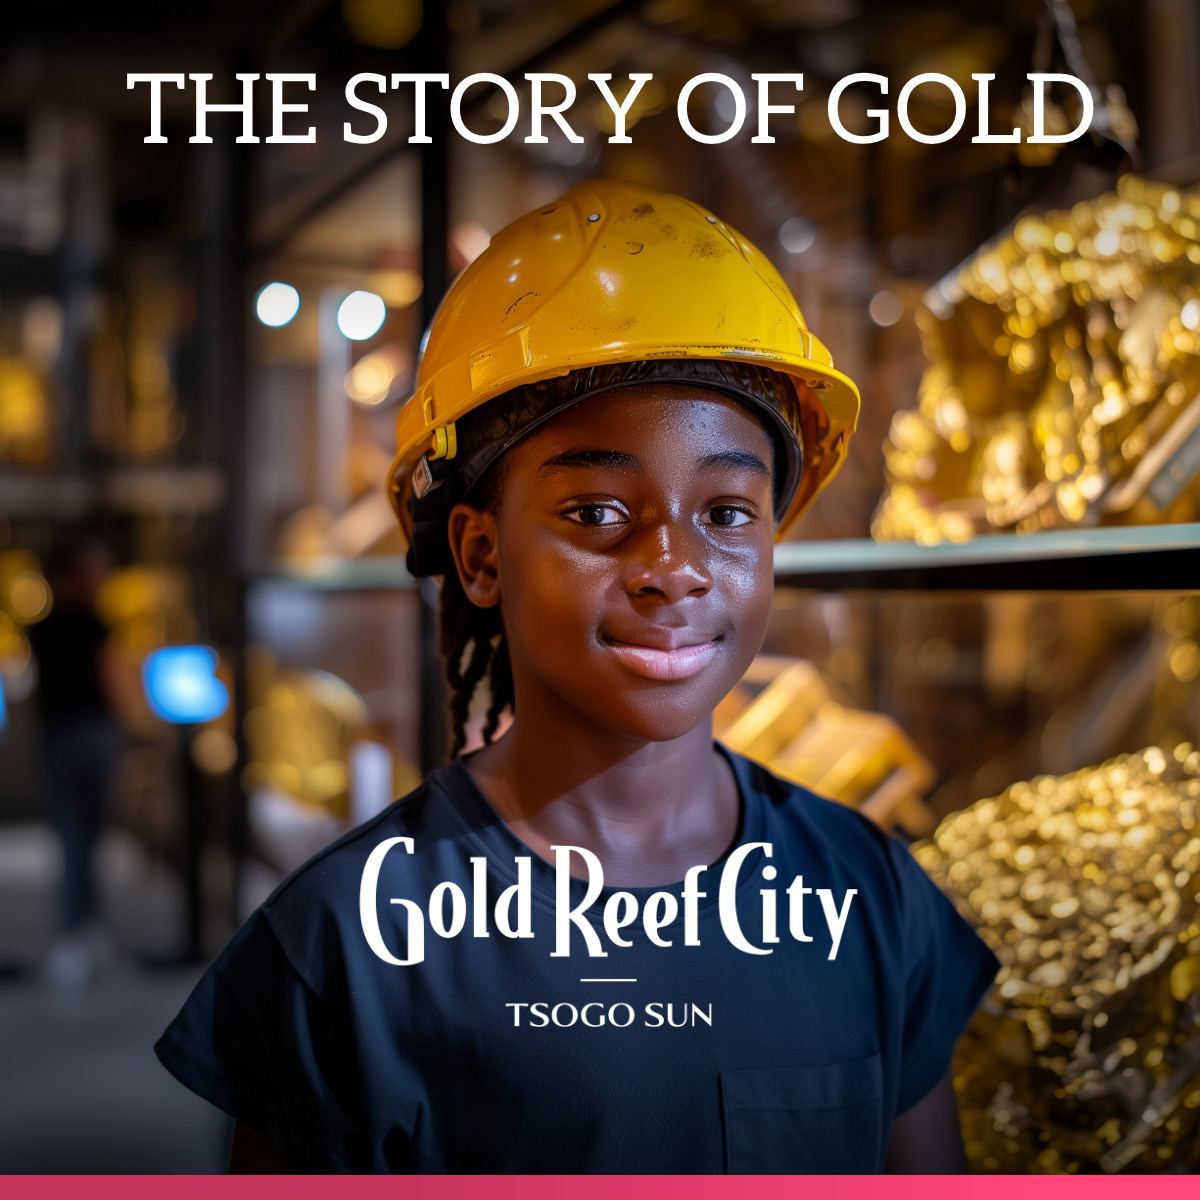 Go deep underground, into the darkness and you’ll find the story of gold on board the Mine Tour. Every metre down you go, every turn is a new adventure full of thrills and history. The City of Gold is waiting to tell it’s story, book your ticket bit.ly/3HF9Oeb